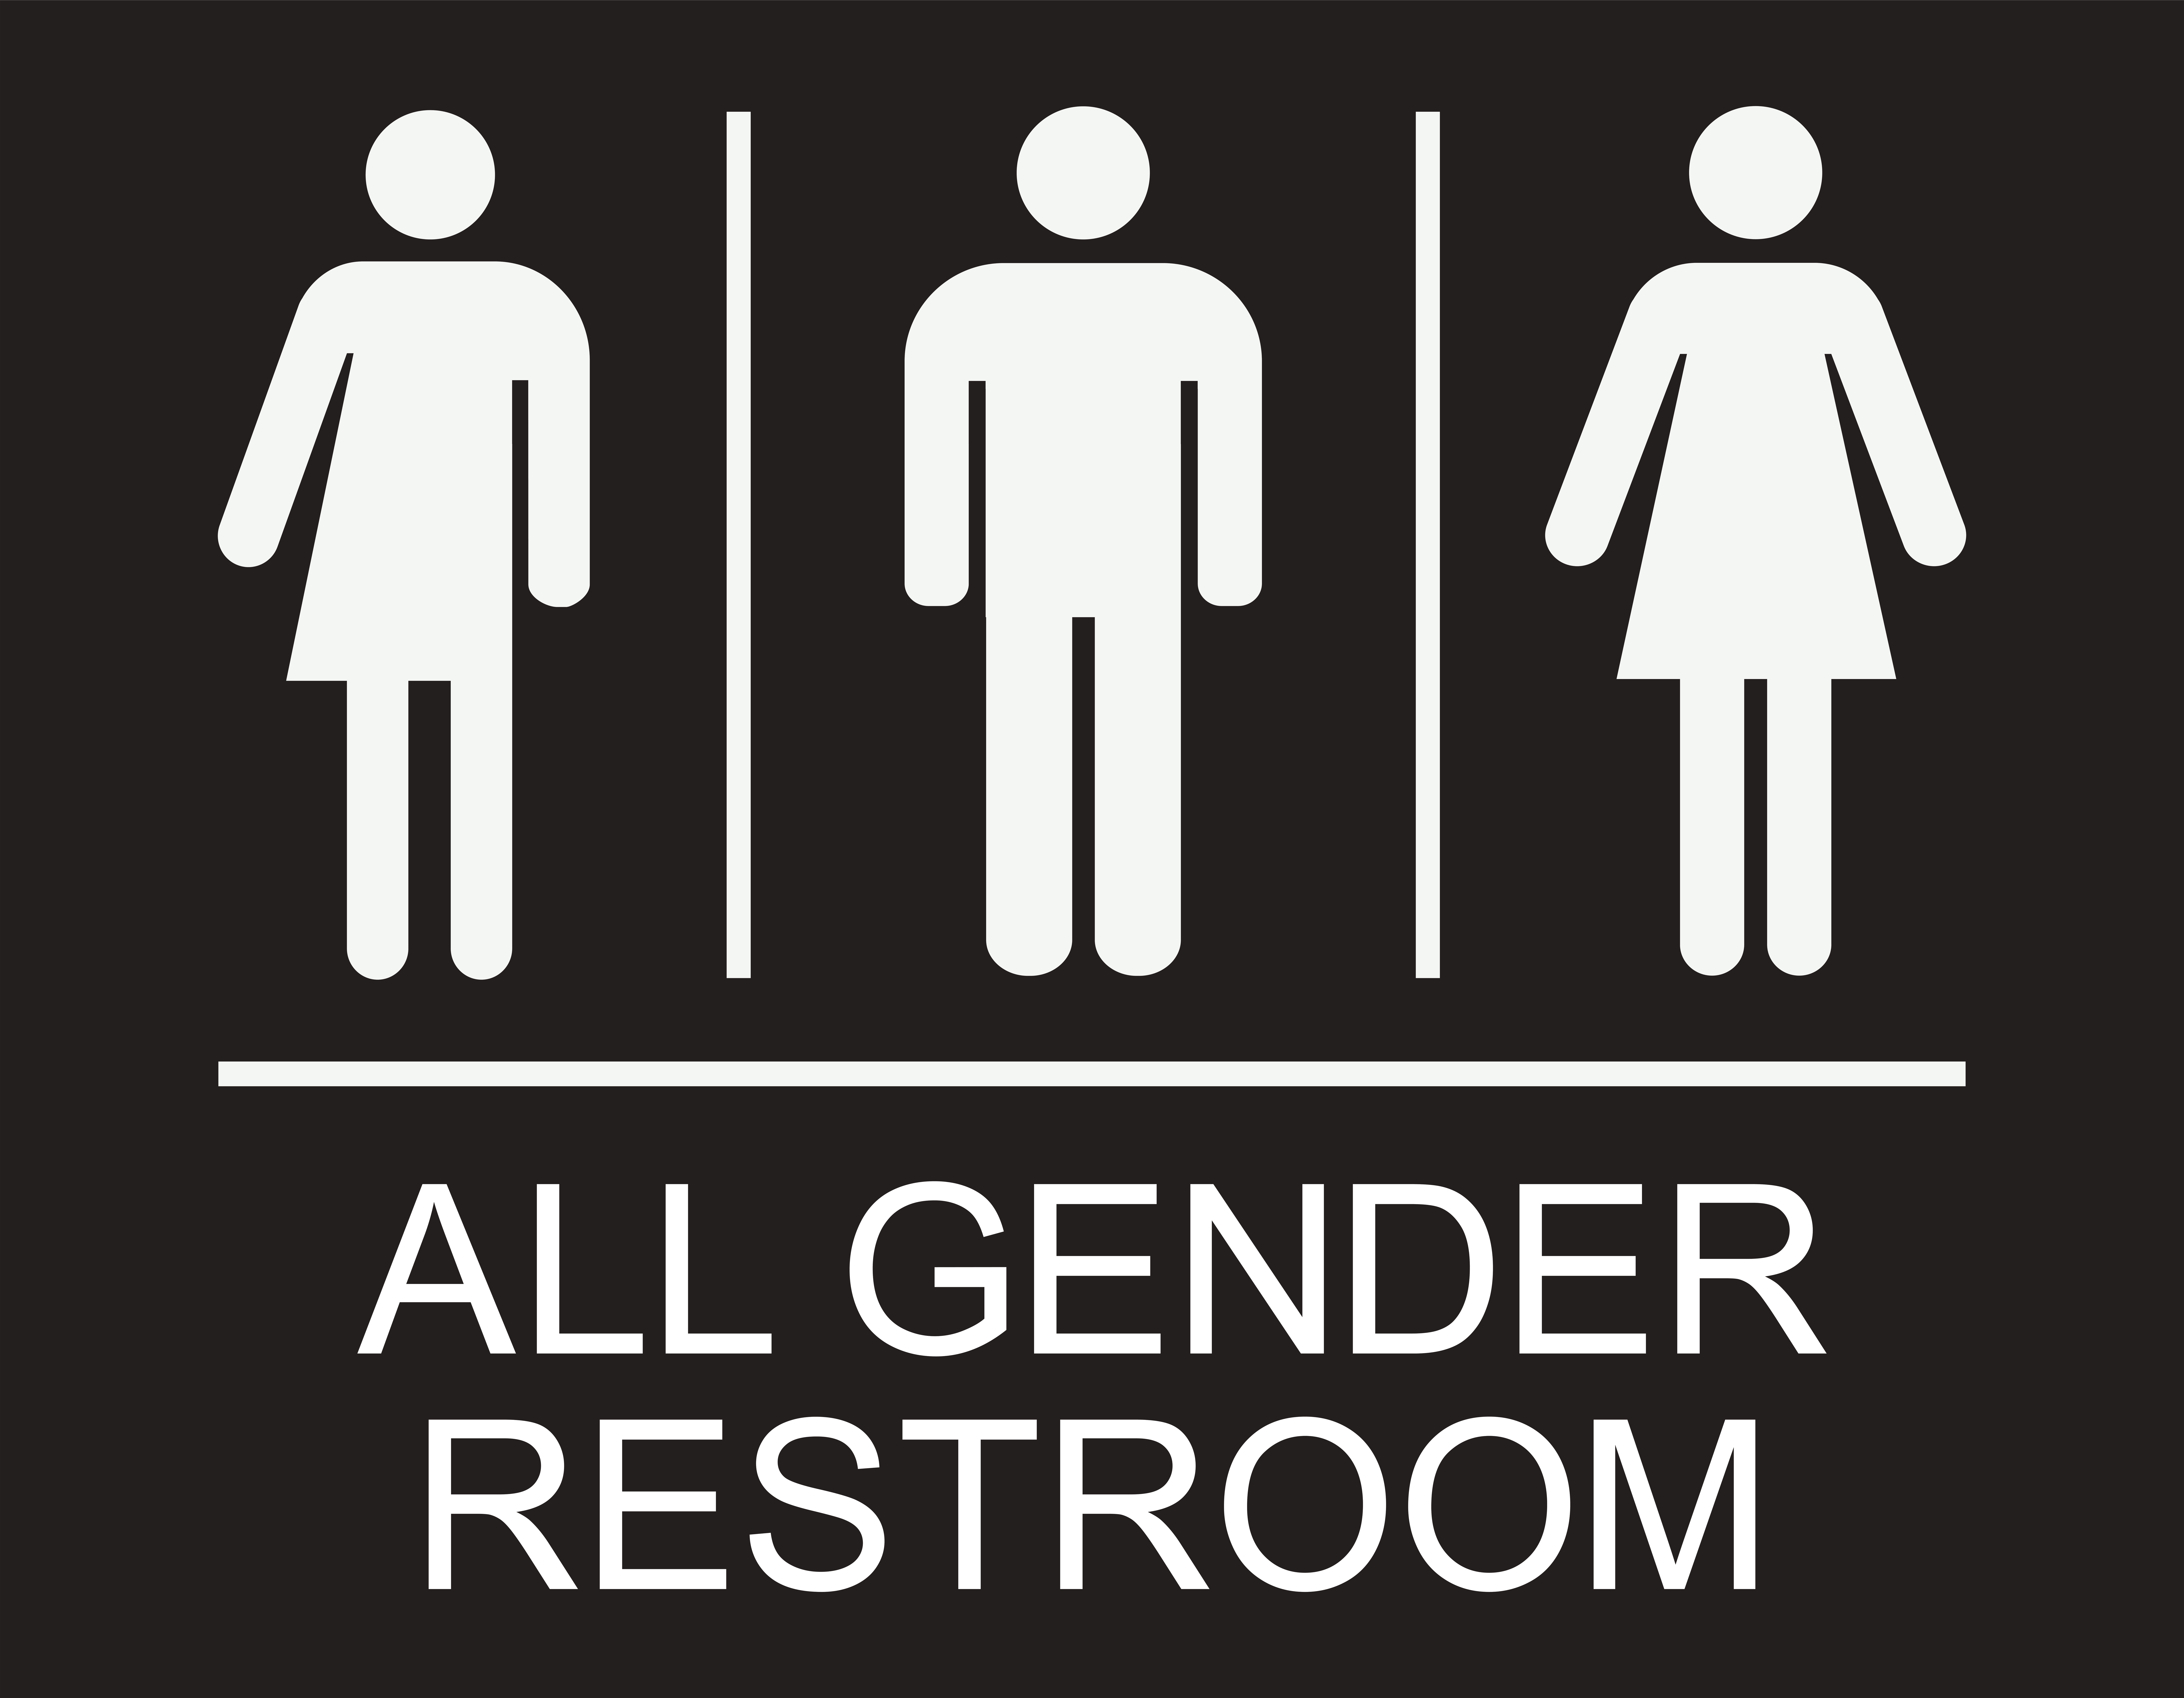 Federal Circuit Split Eleventh Circuit Affirms Florida School District Policy Separating Bathrooms by Biological Sex Robbins Schwartz image photo